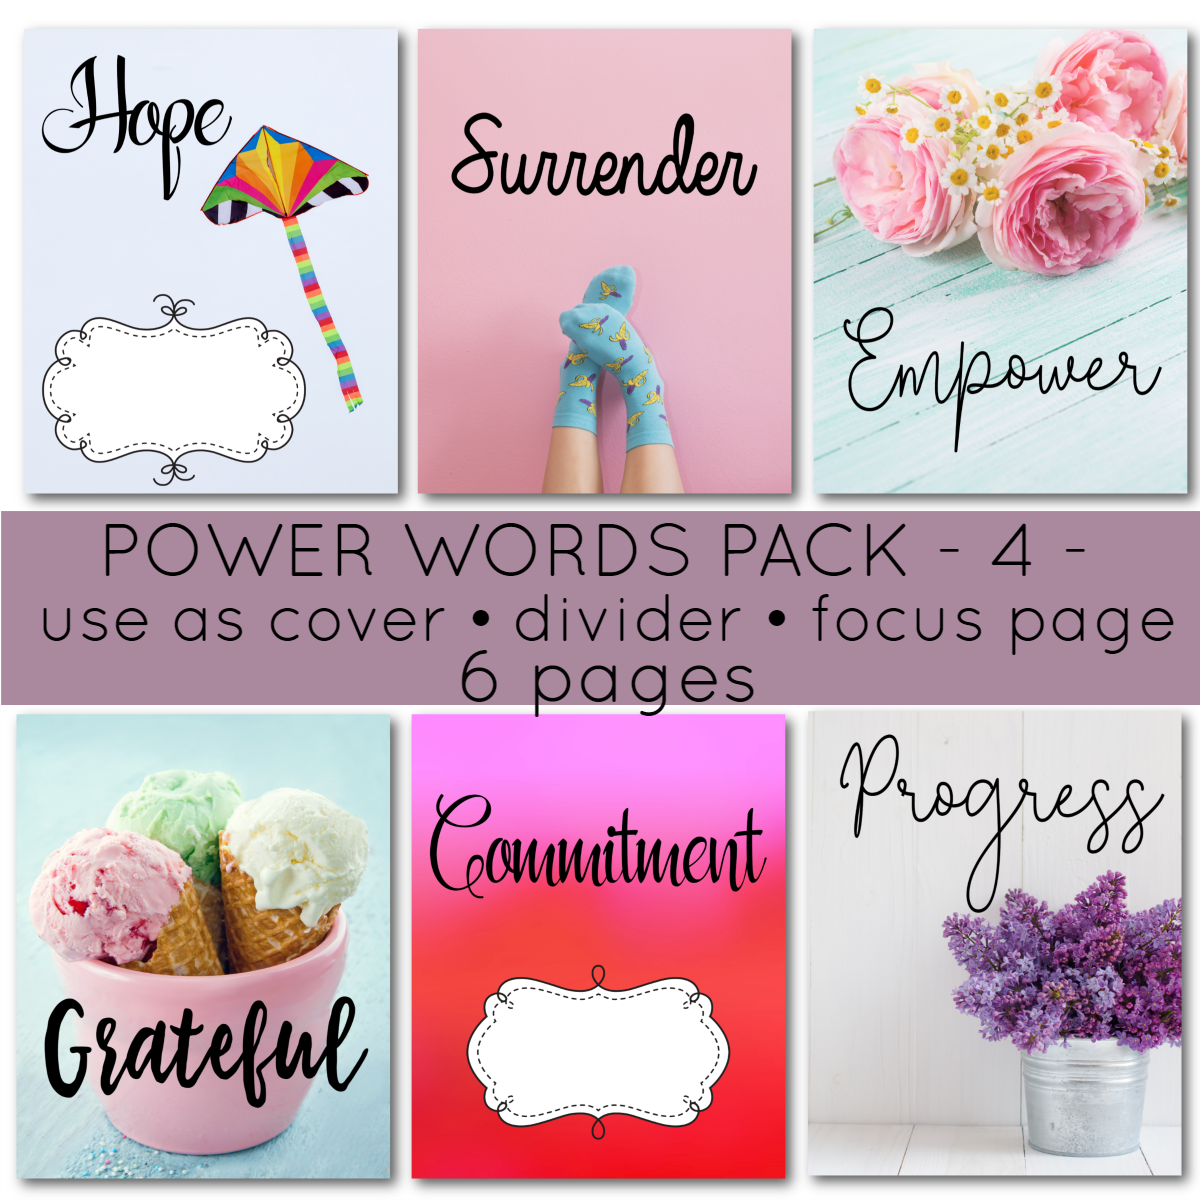 There is no denying power of words to harness your thoughts. Now, put them in your homeschool planner. You’ll love these 6 pages of high quality images along with classical fonts for your 7 Step Homeschool Planner.